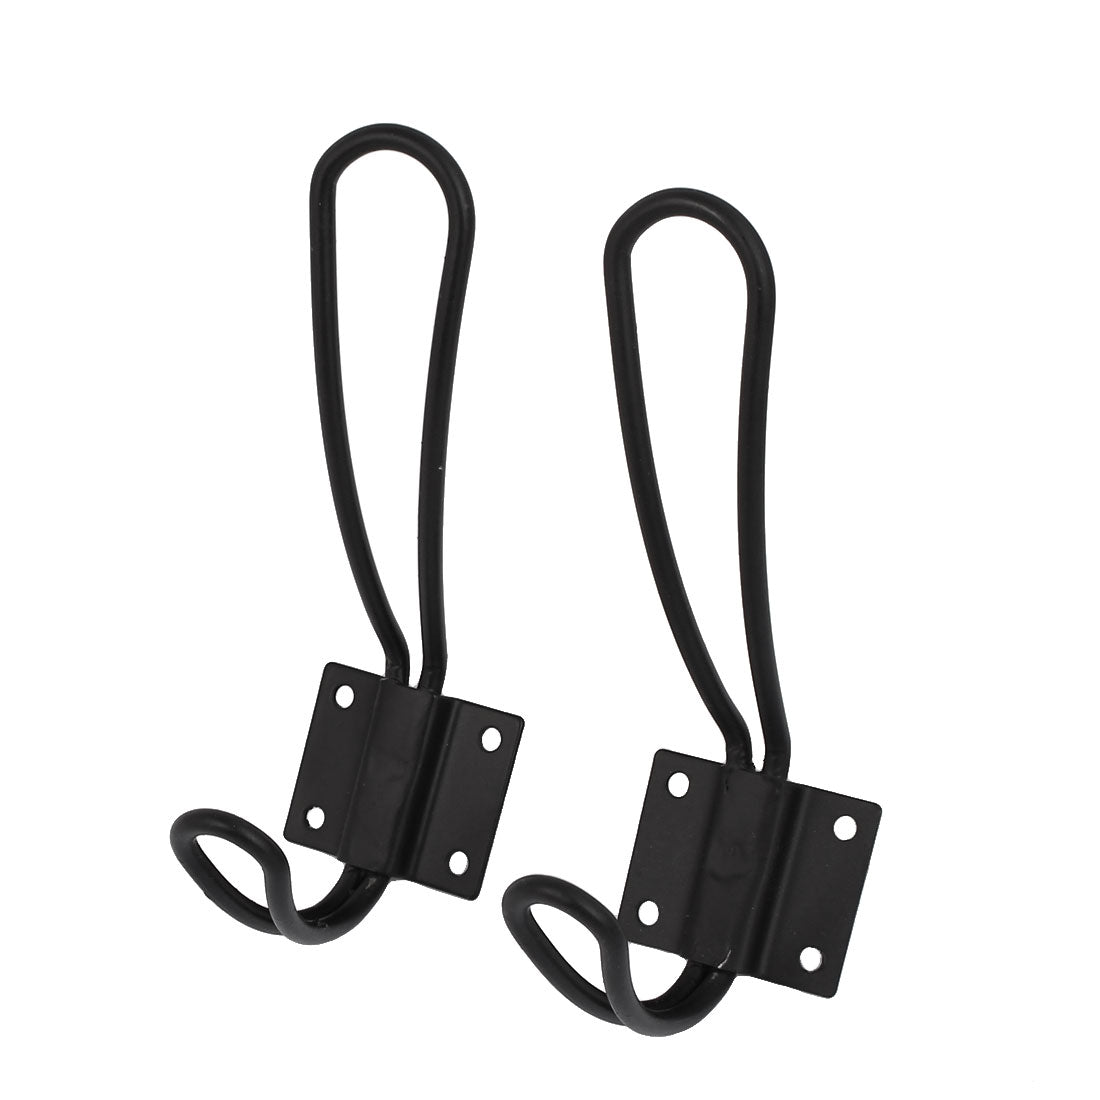 uxcell Uxcell Clothes Towels Display Wall Mounted Hanger Hook Bracket Black 2pcs